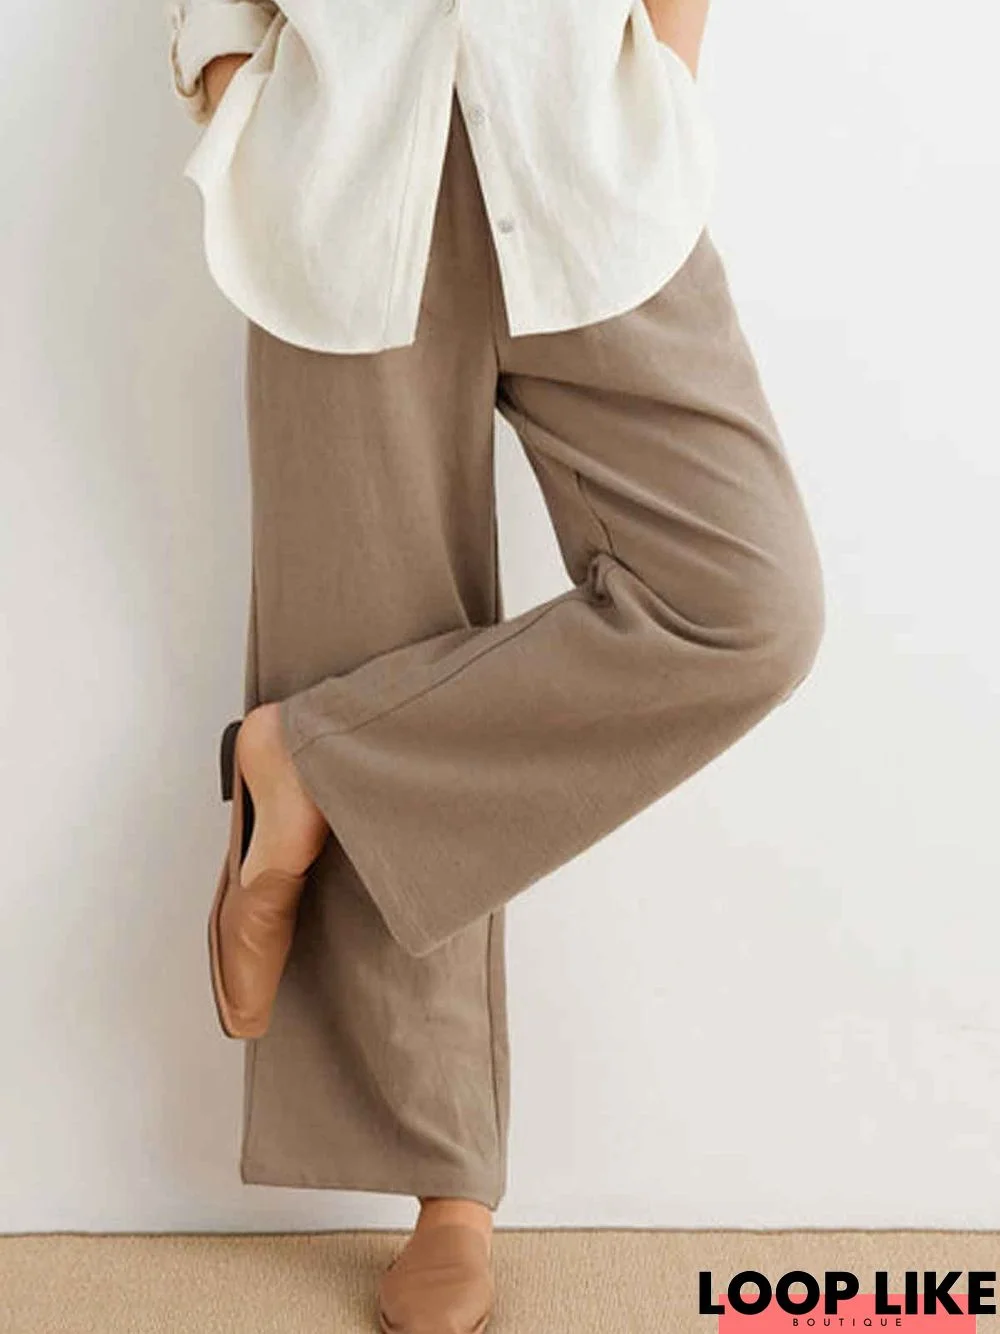 Polyester Cotton Plain Casual Casual Pants